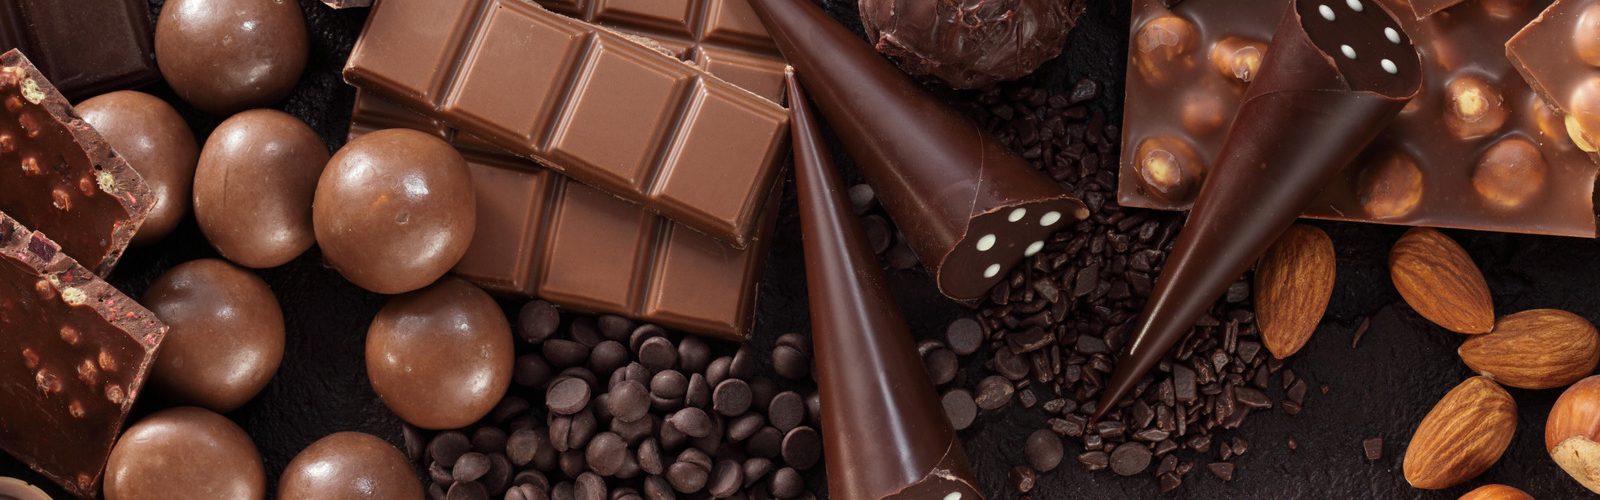 Things to consider before purchasing chocolate